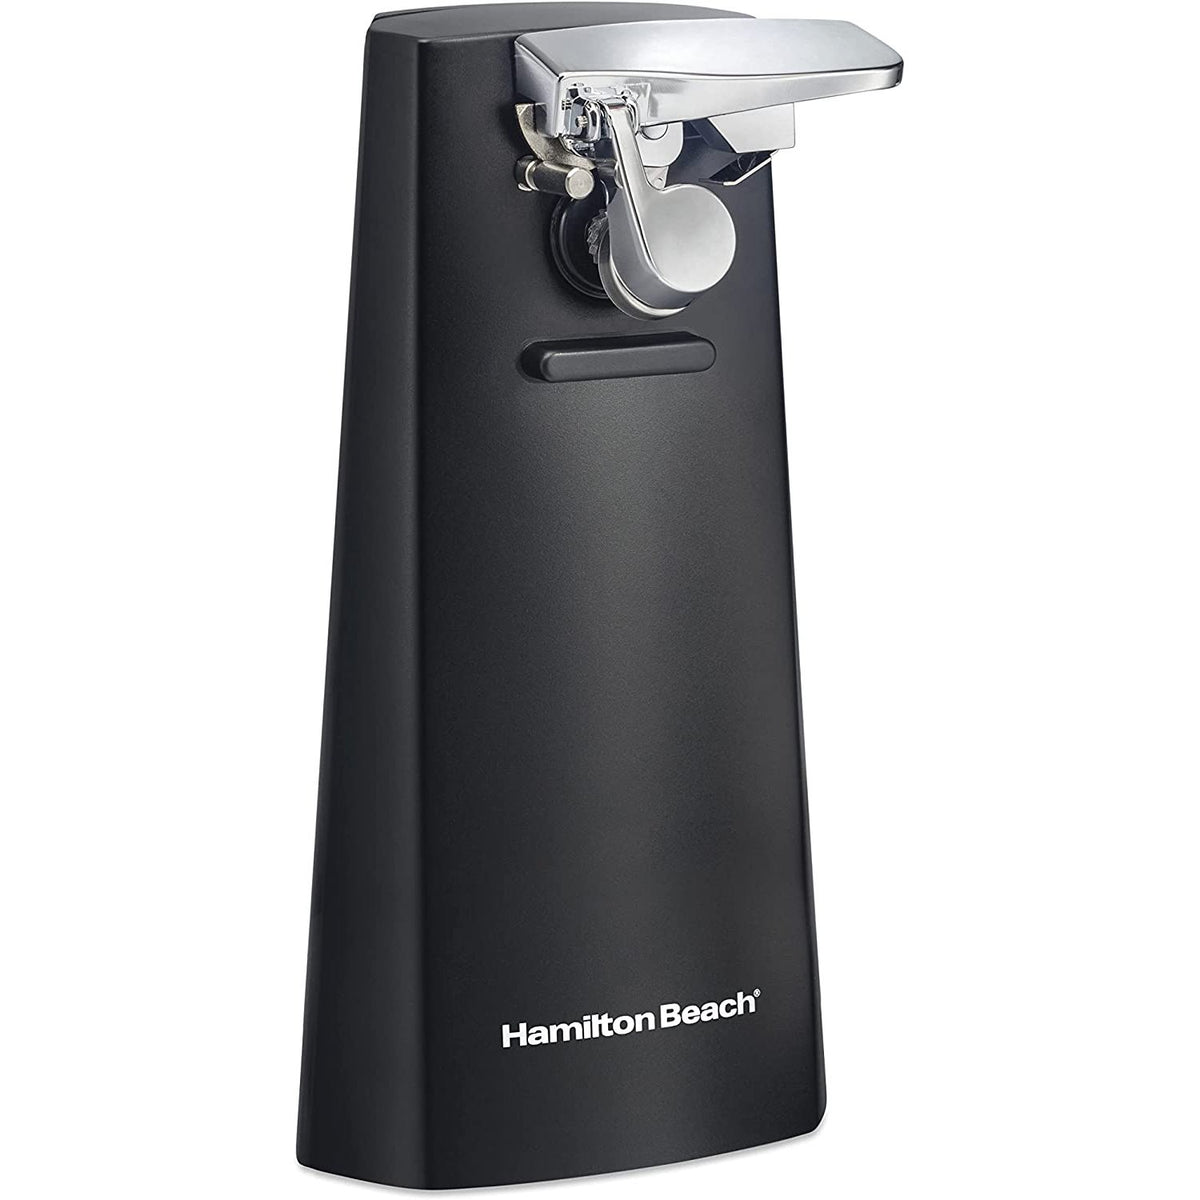 Hamilton Beach Openease Can Opener 76300R Extra Tall WITH Knife